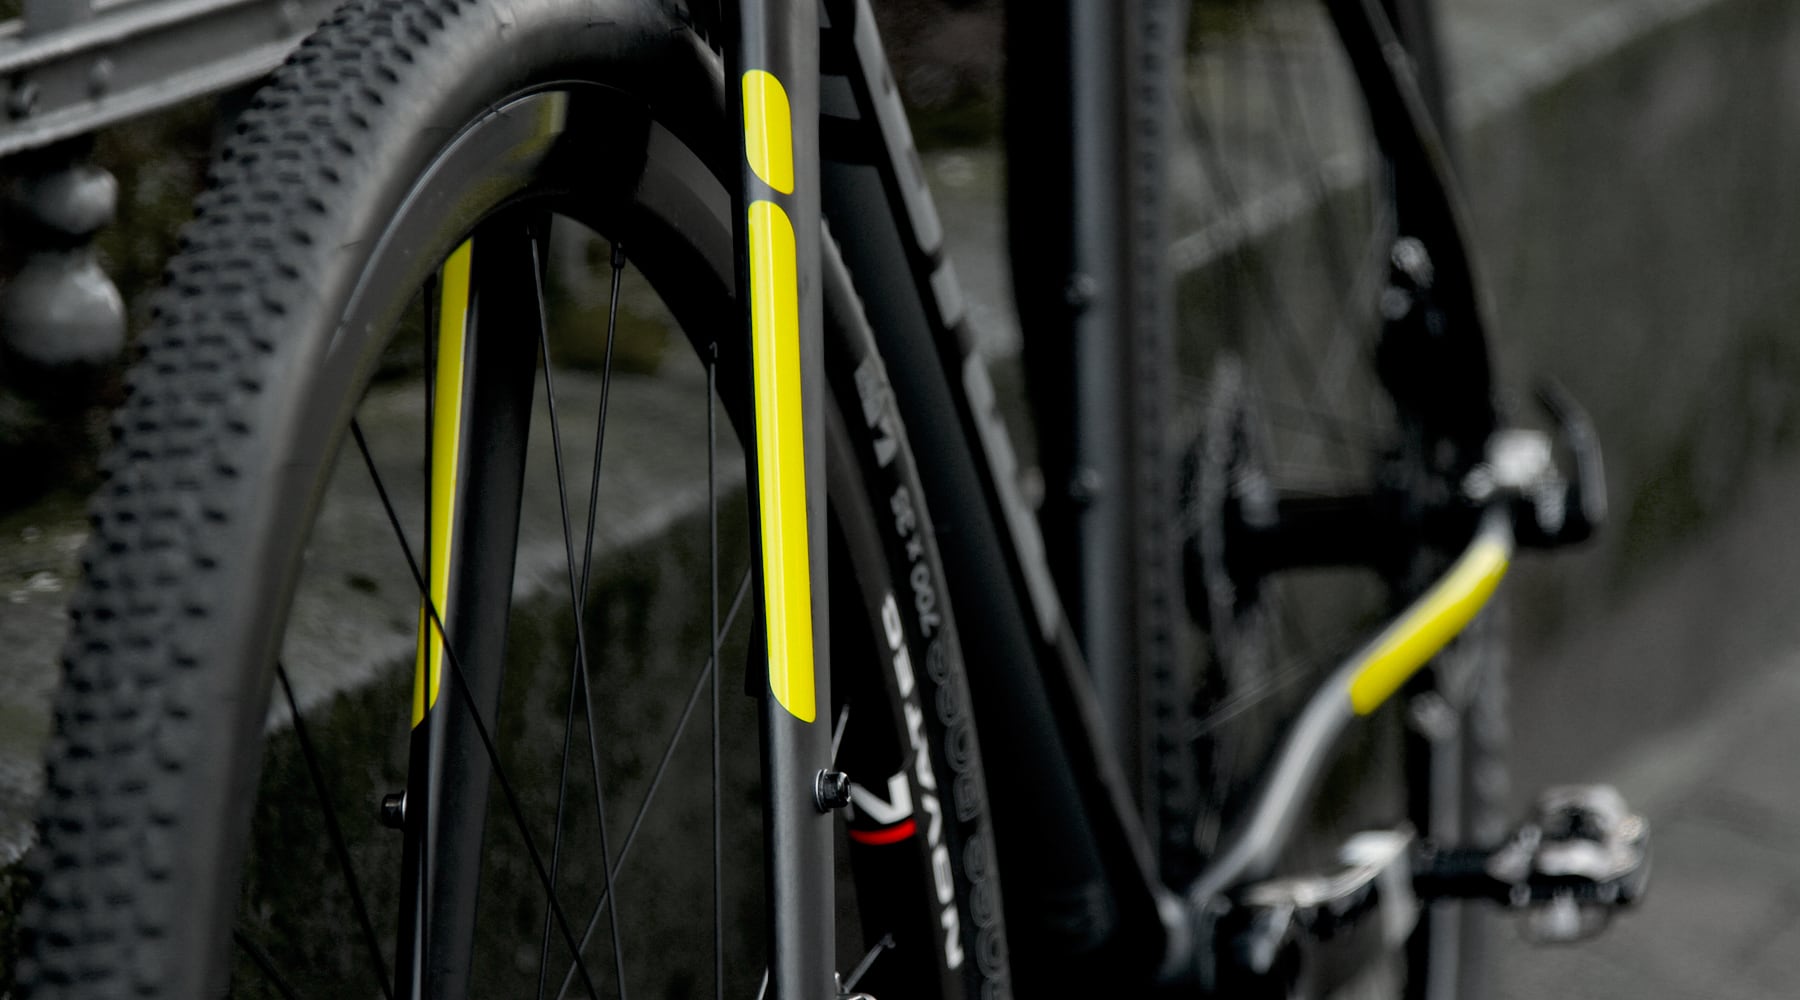 FLECTr reflective frame kit for cycles - from high viz yellow to stealth black